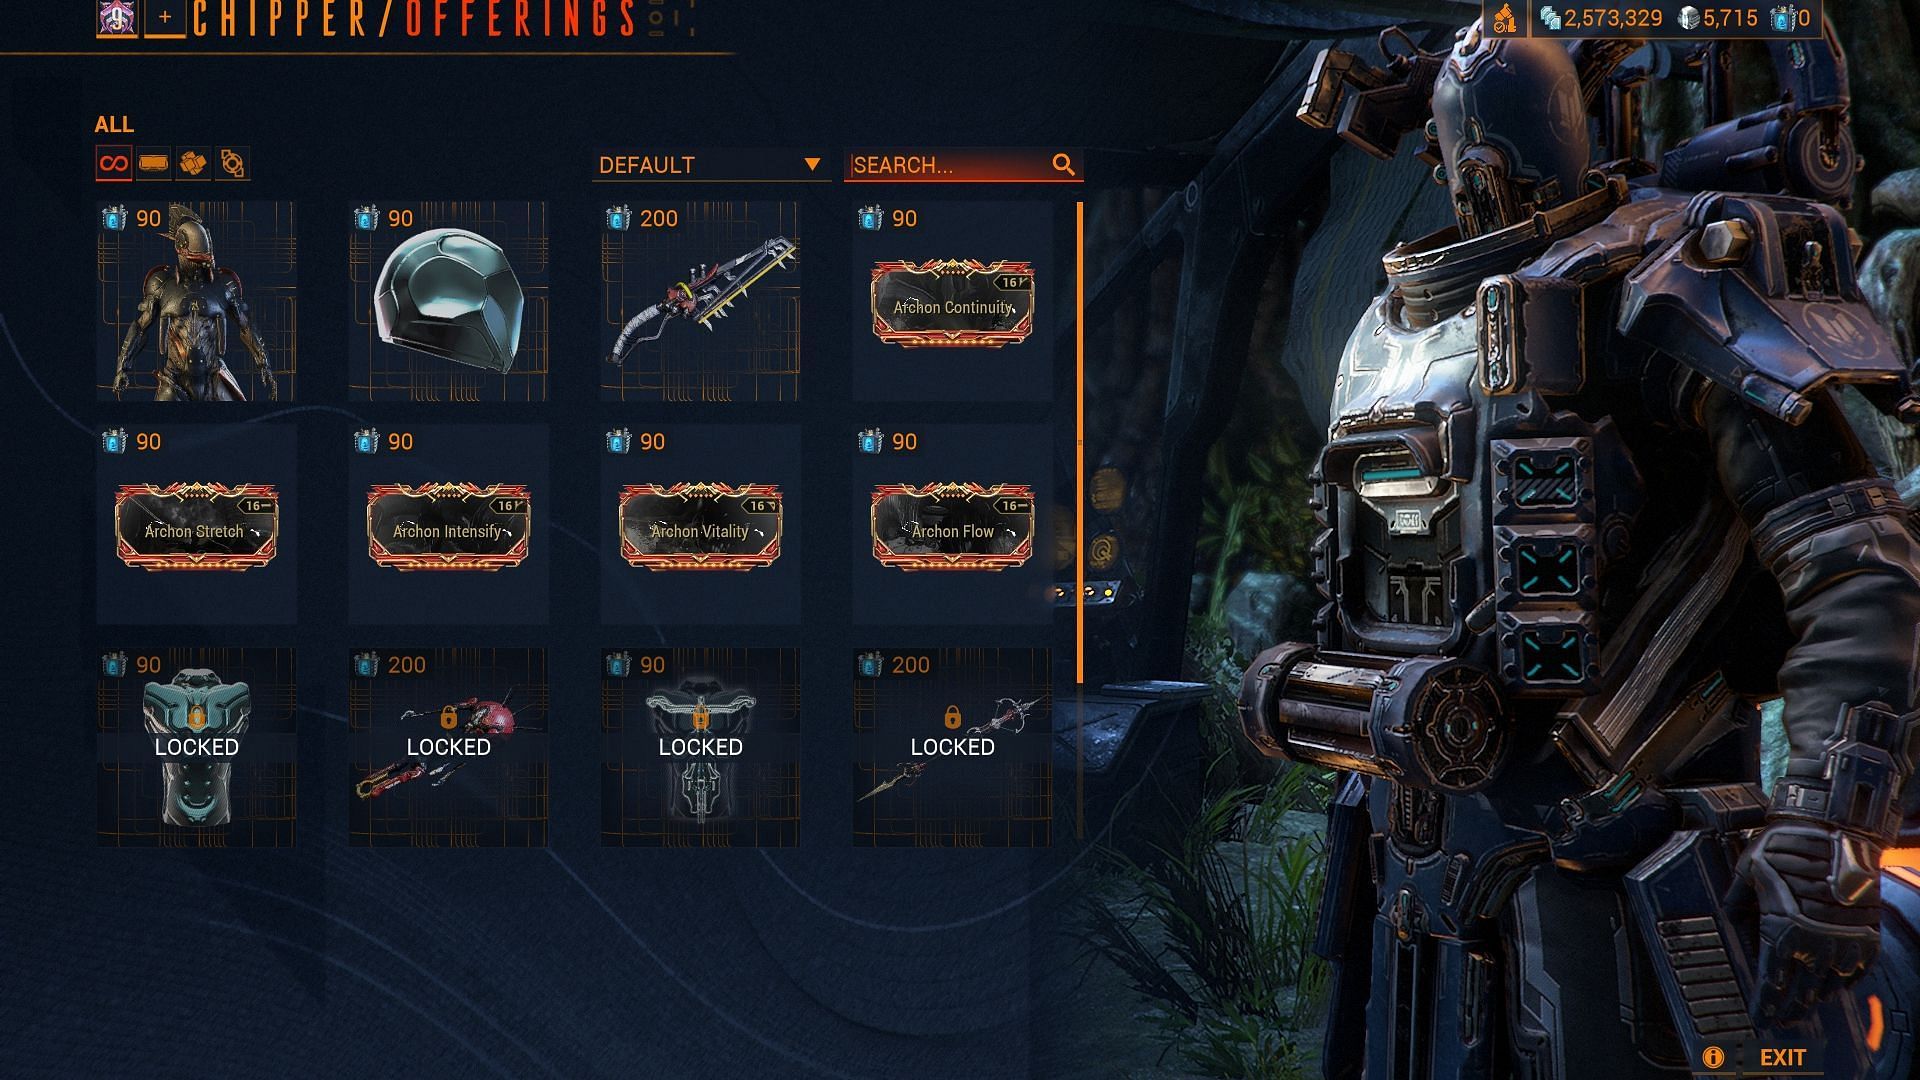 You can buy Archon mods from Chipper. (Image via Digital Extremes)